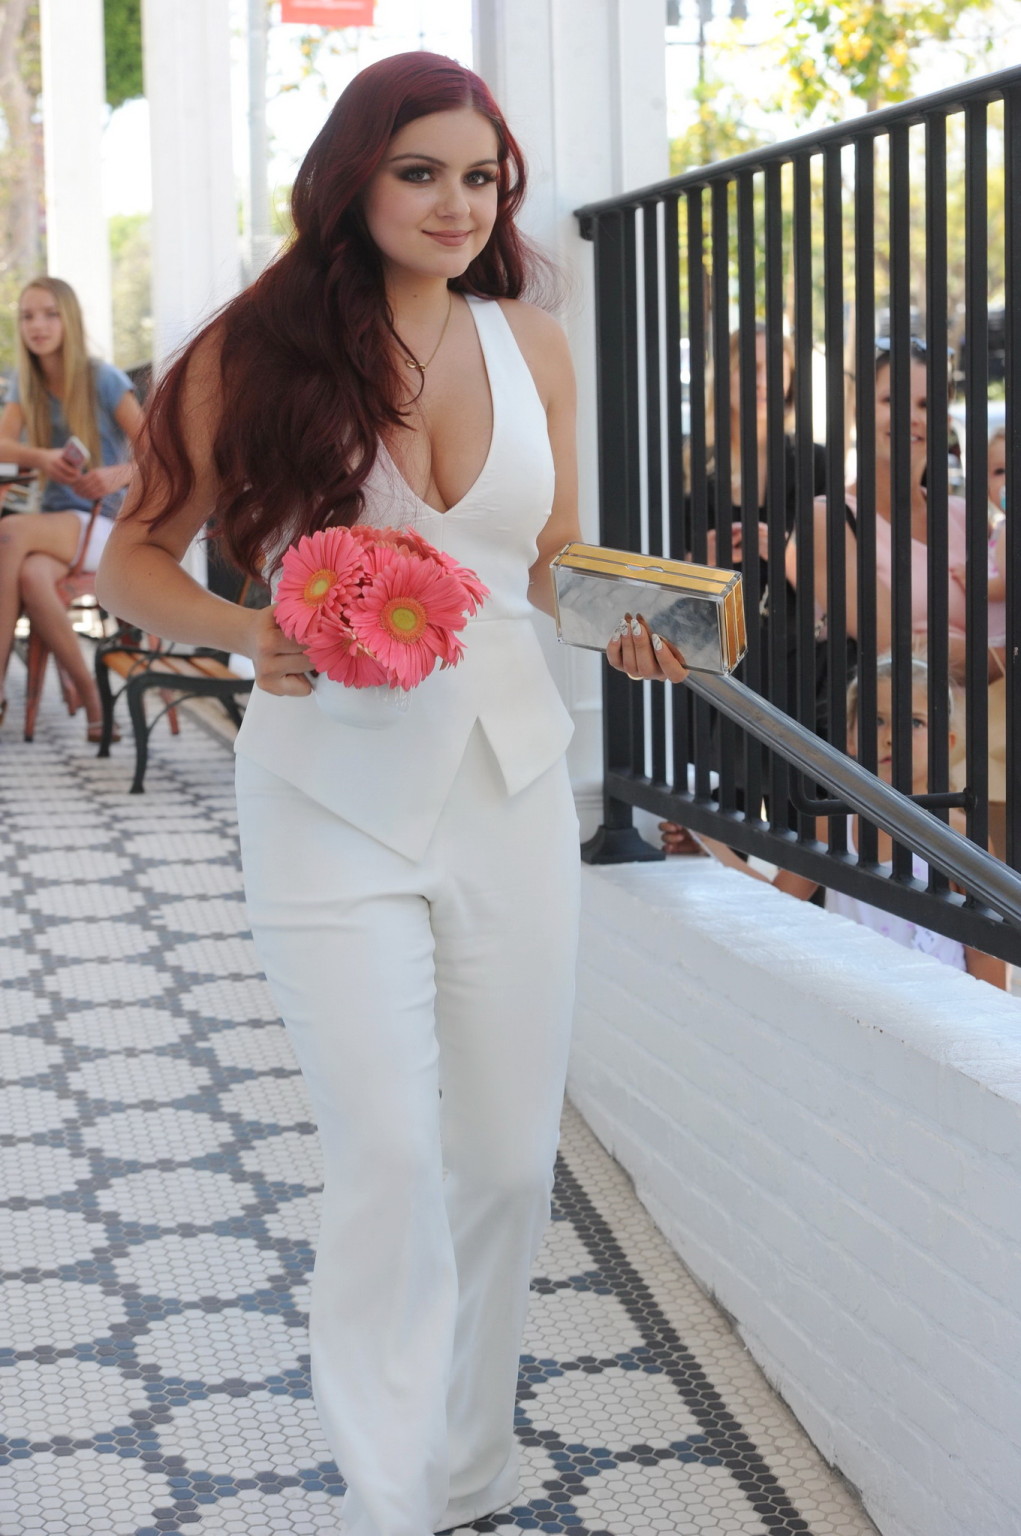 Ariel Winter erupting from her skimpy white outfit #75143502